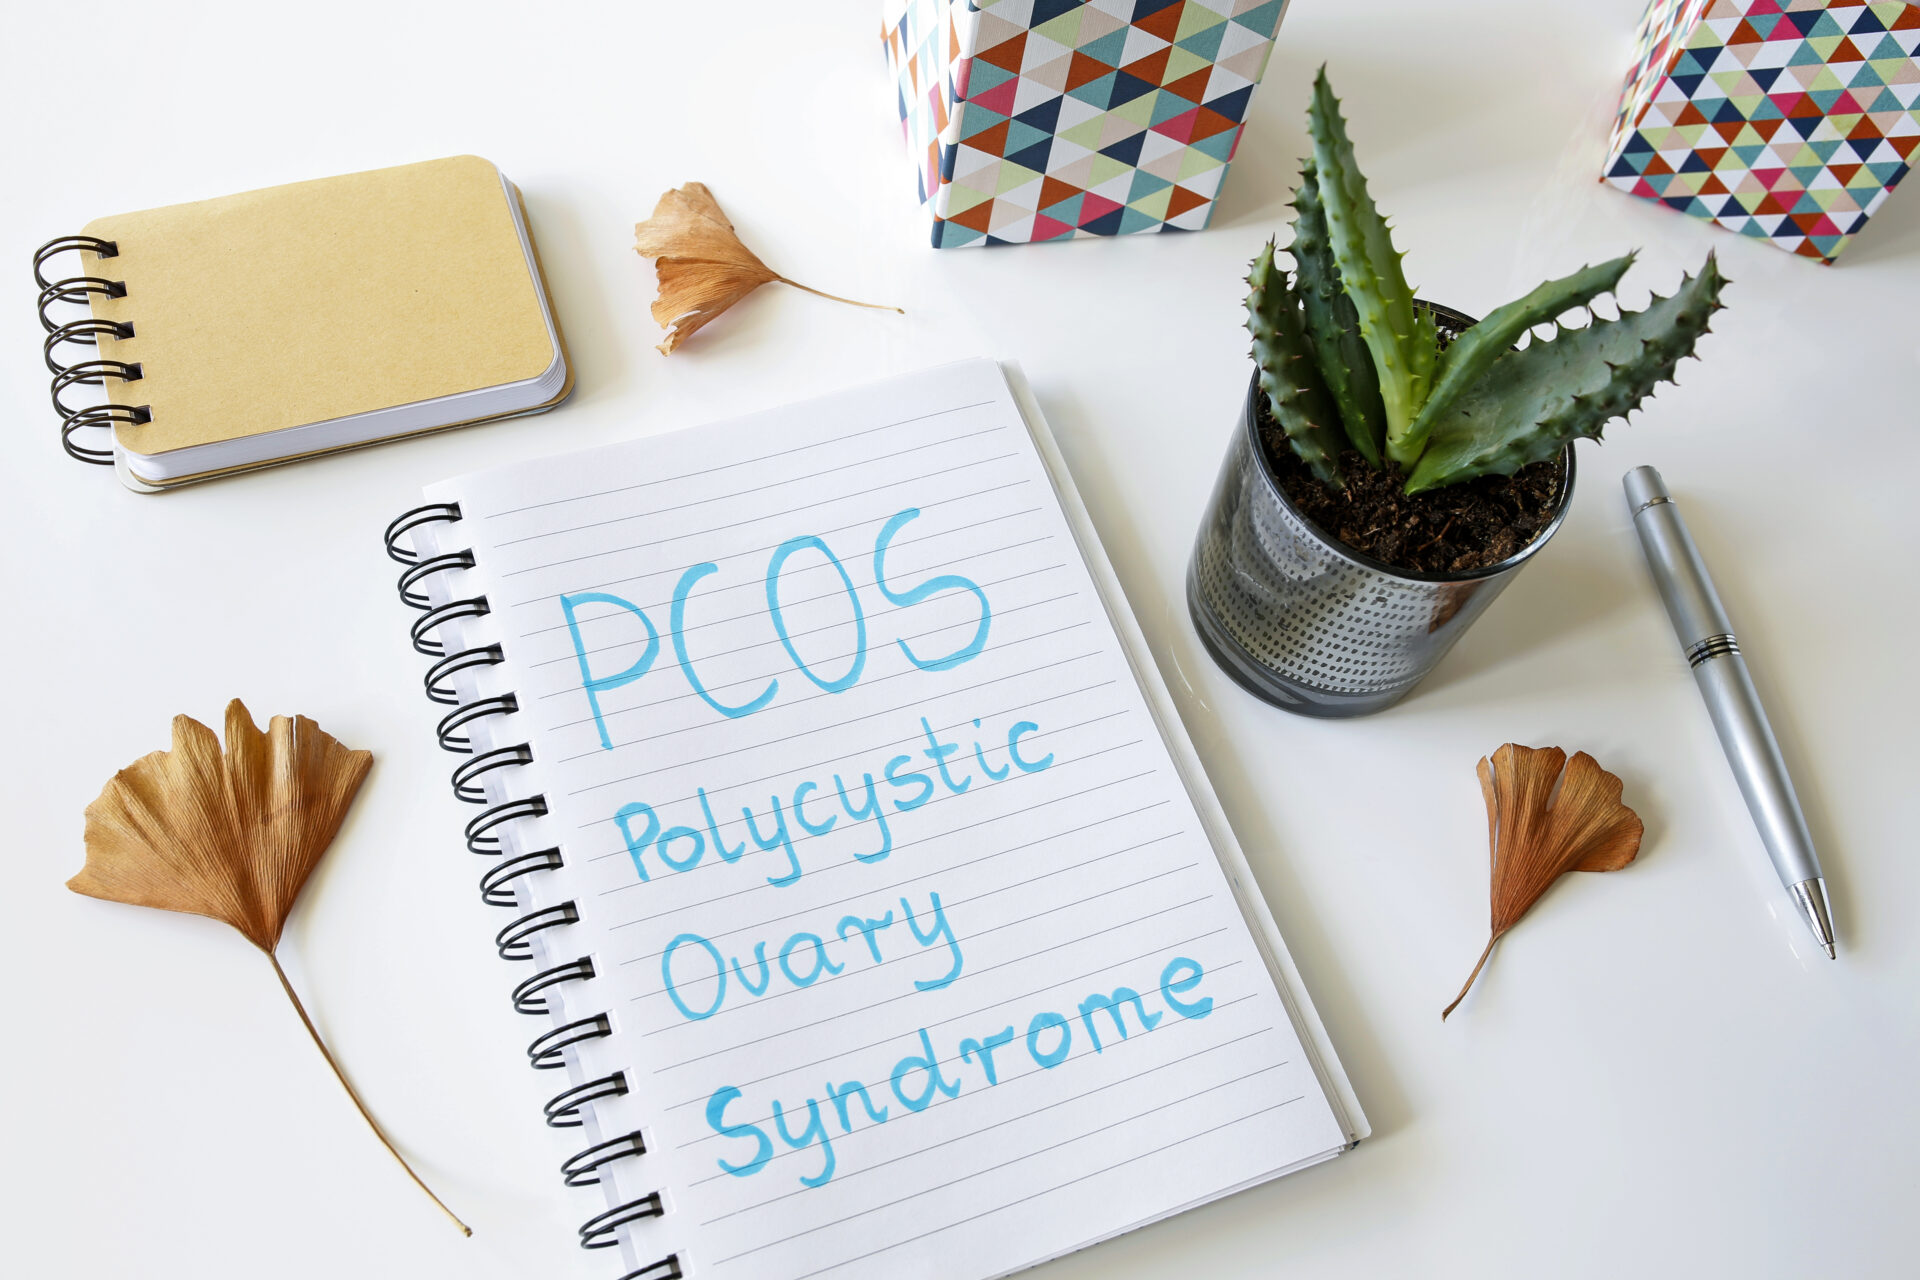 What about PCOS?